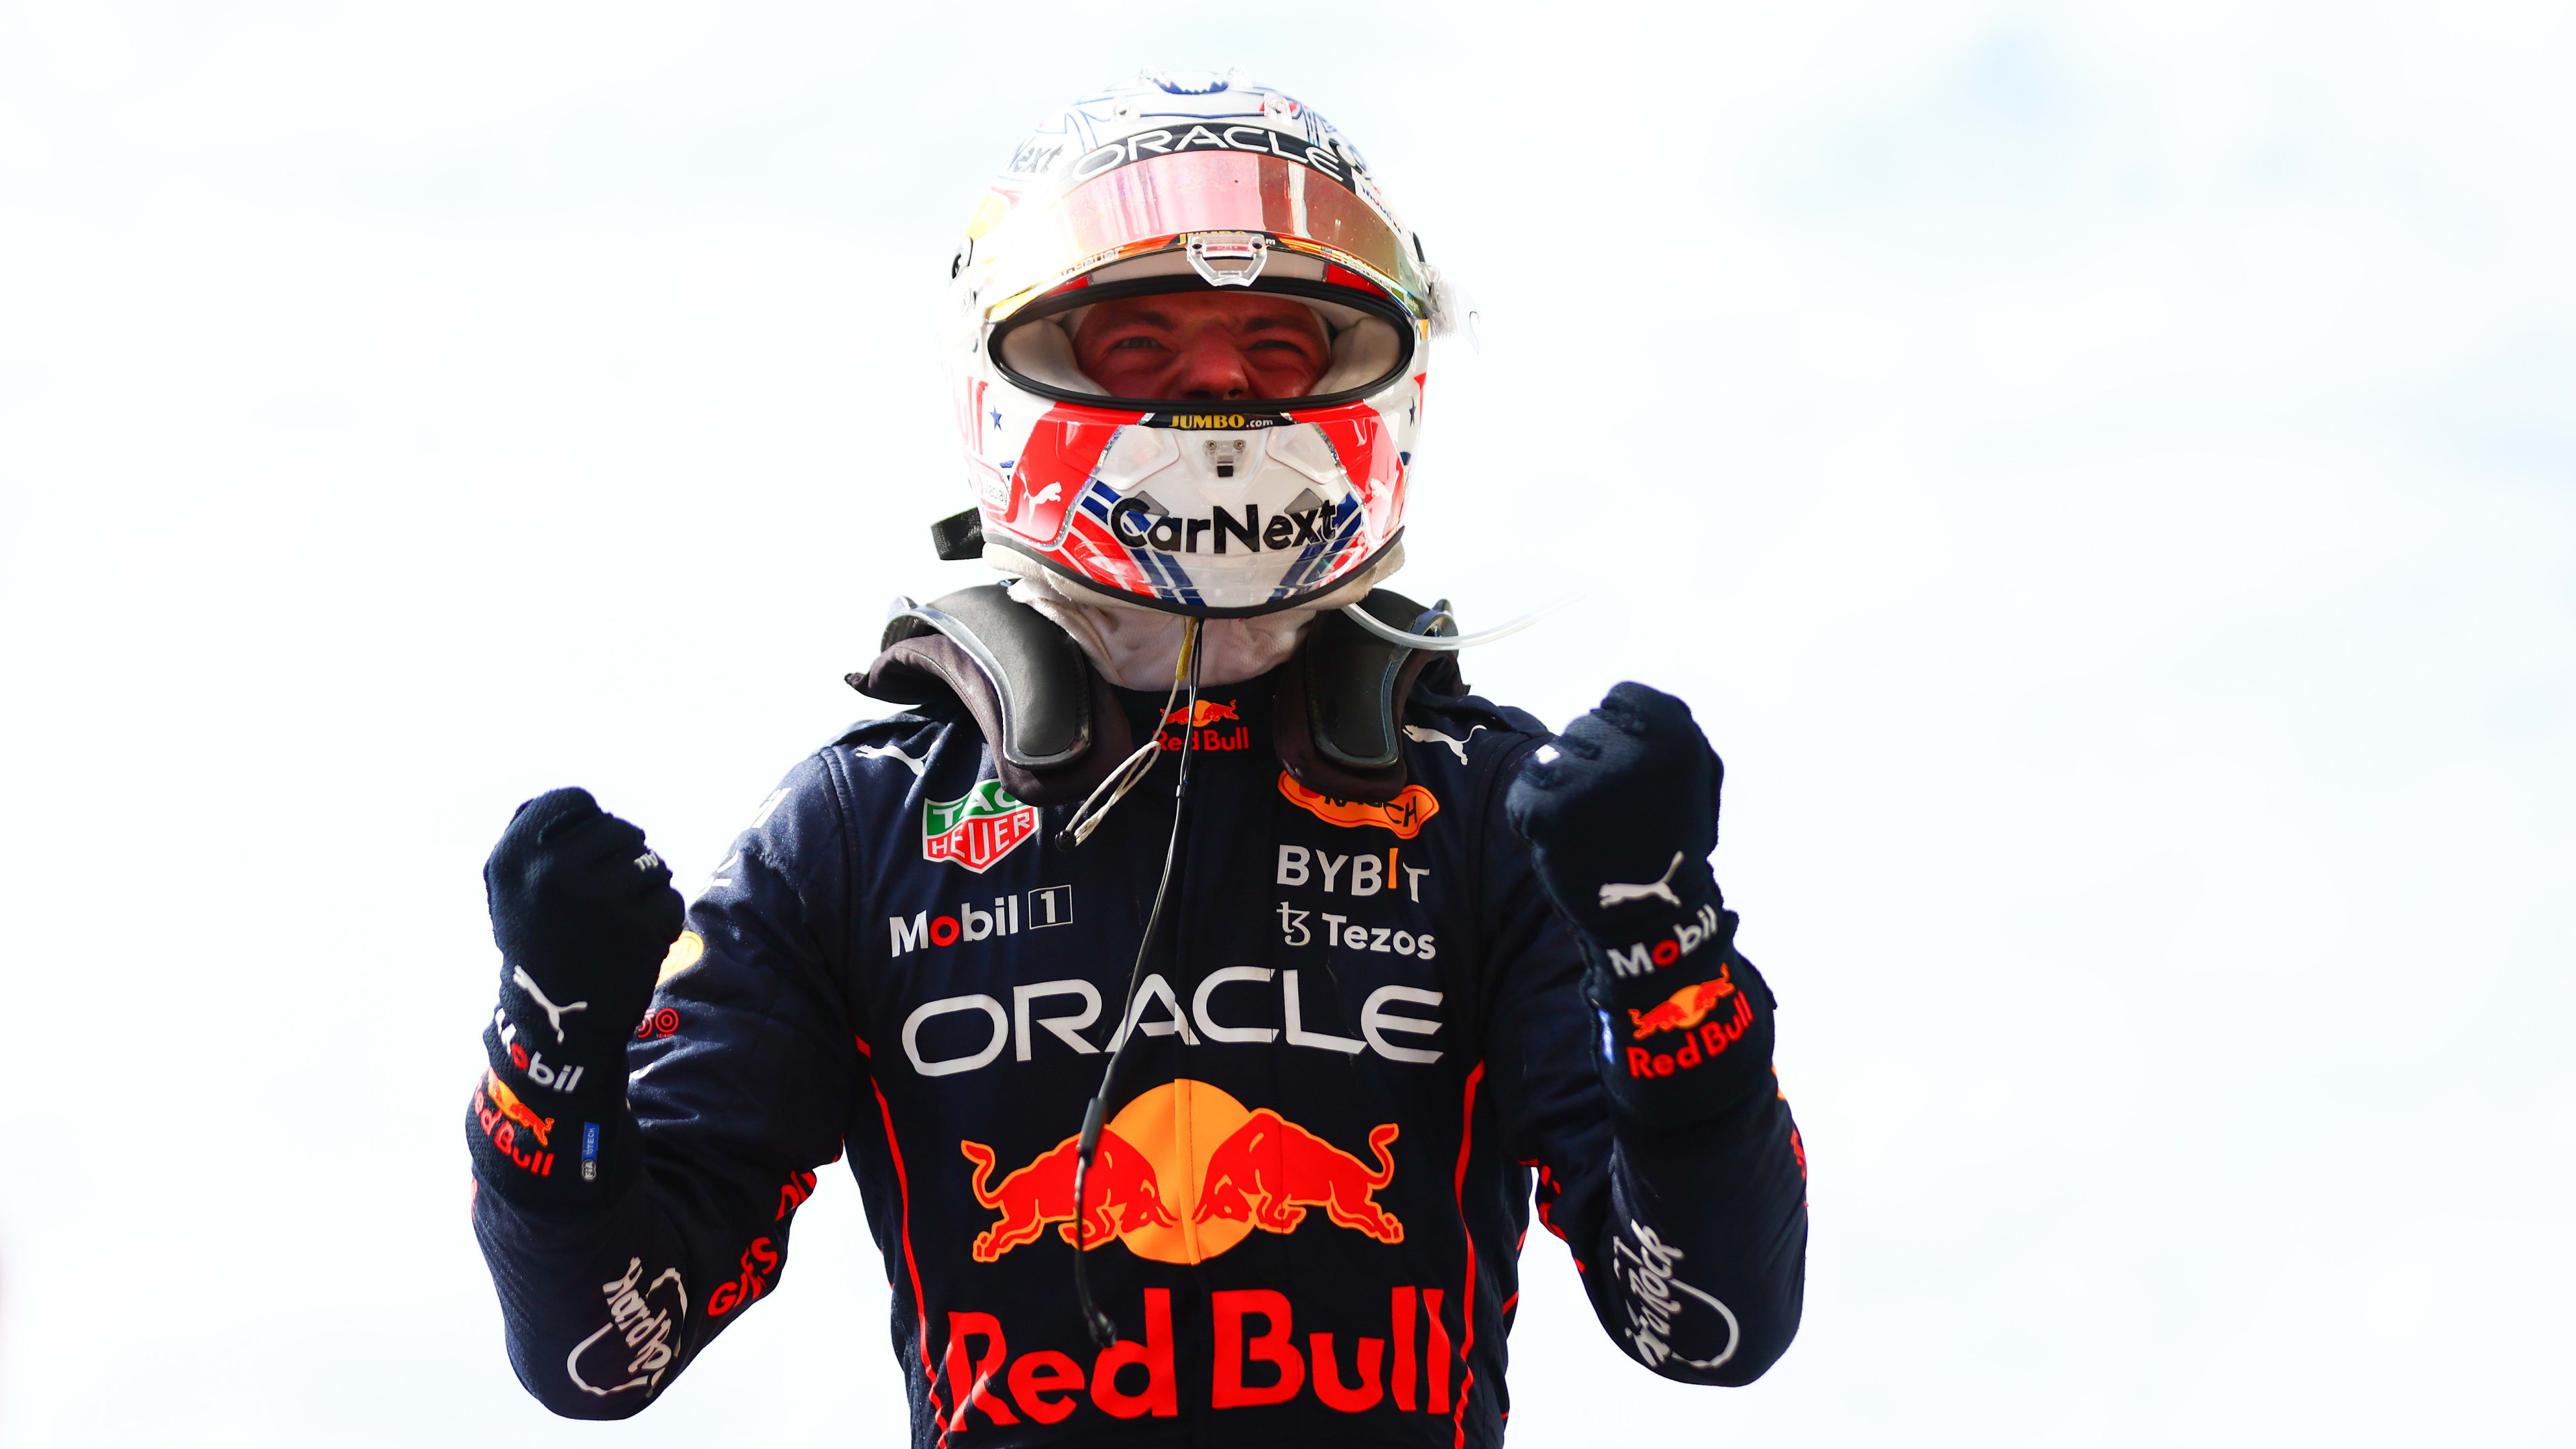 Verstappen beats Hamilton to United States GP victory as Red Bull secure an emotional constructors’ title win | Formula 1®